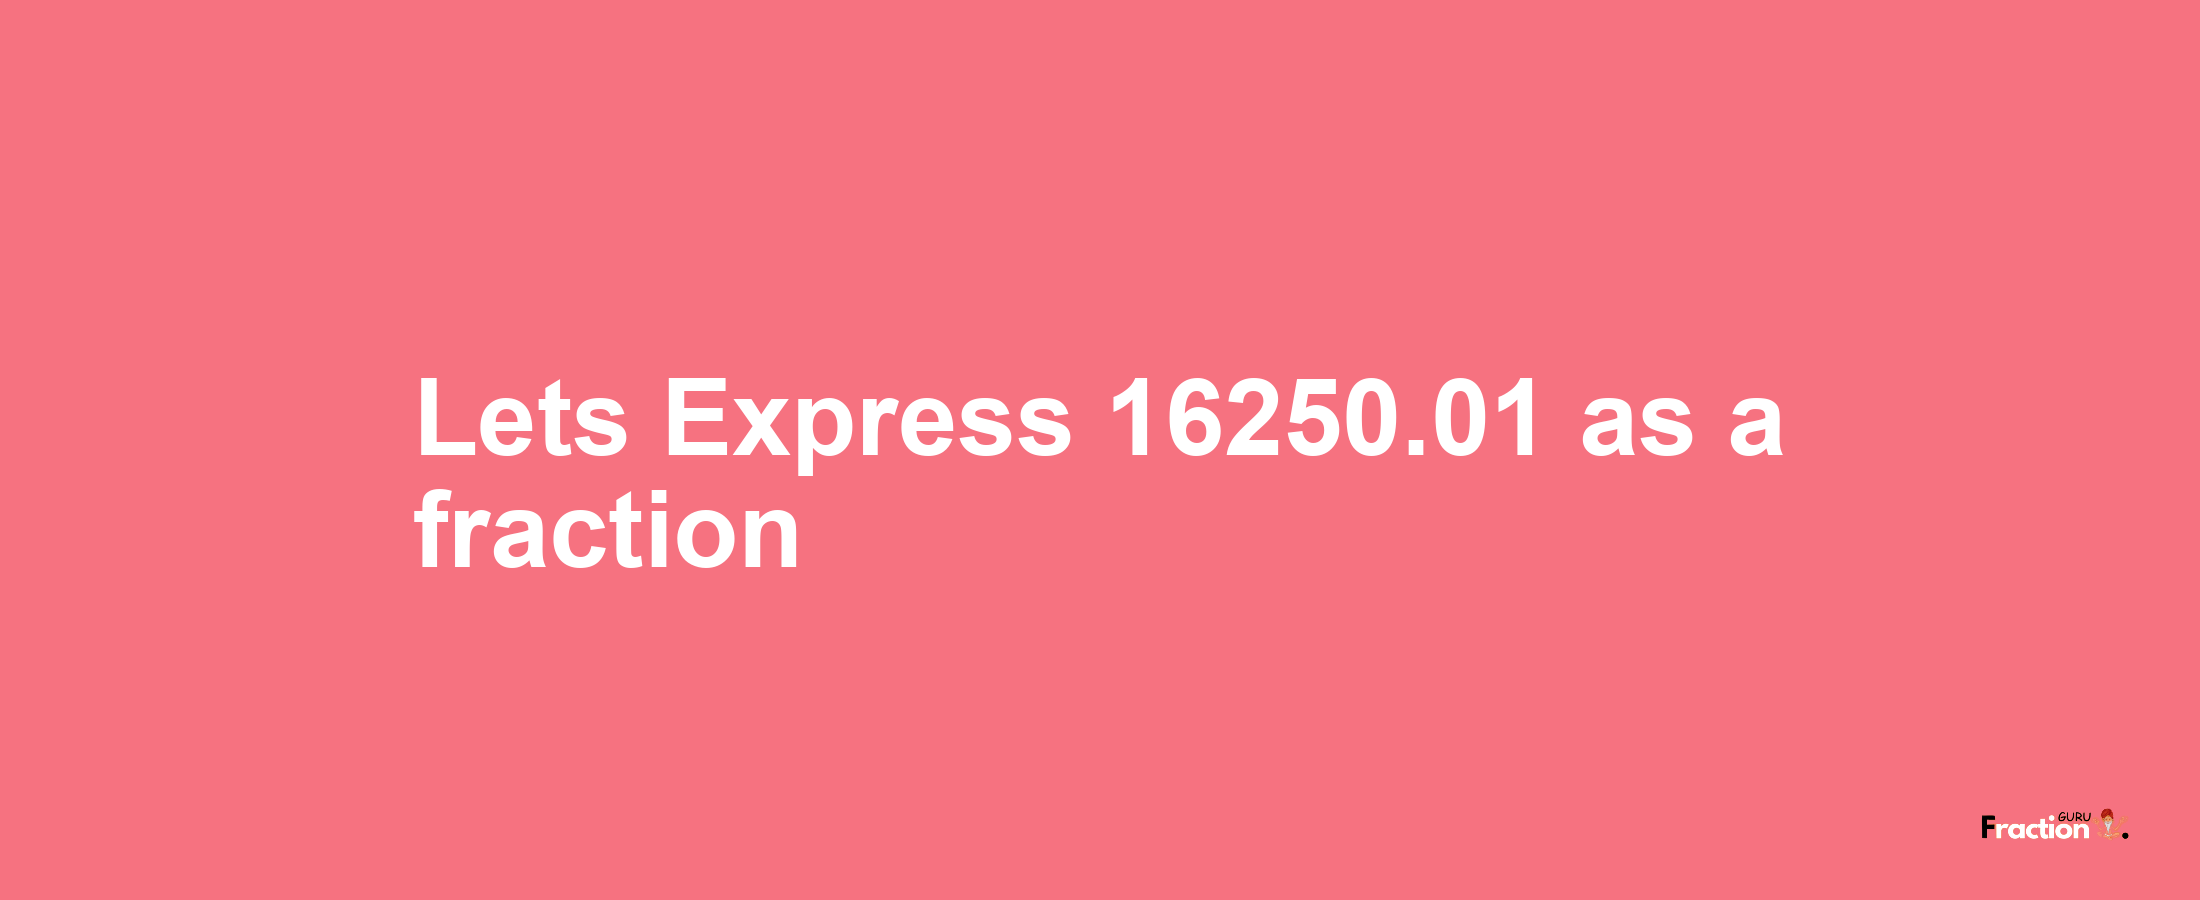 Lets Express 16250.01 as afraction